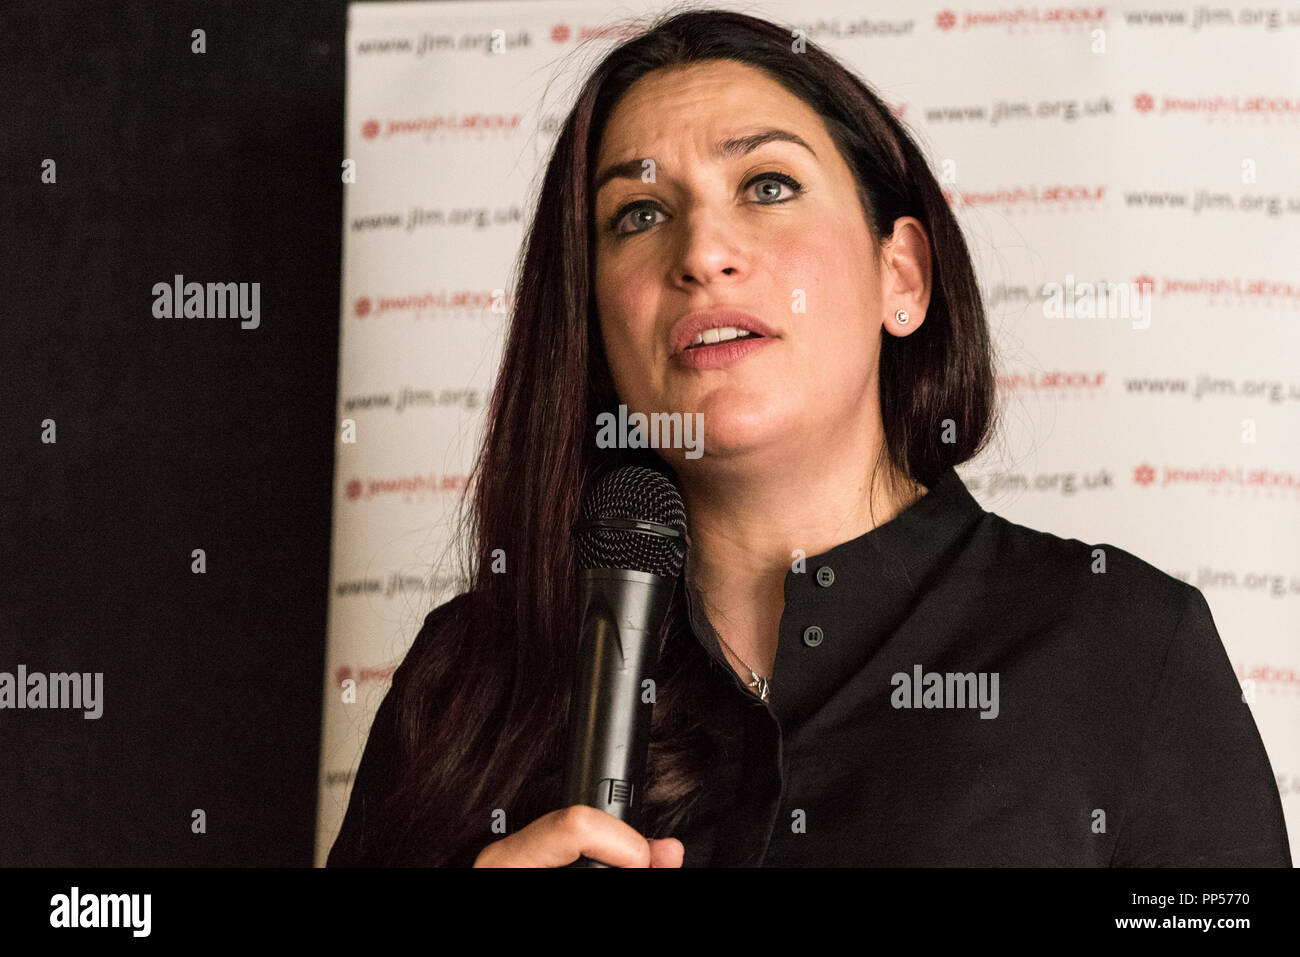 Liverpool, UK. 23rd Sept 2018. Luciana Berger speaking at the Jewish Labour Movement fringe rally at Labour Conference. A packed room, welcomed many speakers. Credit: Rena Pearl/Alamy Live News Stock Photo